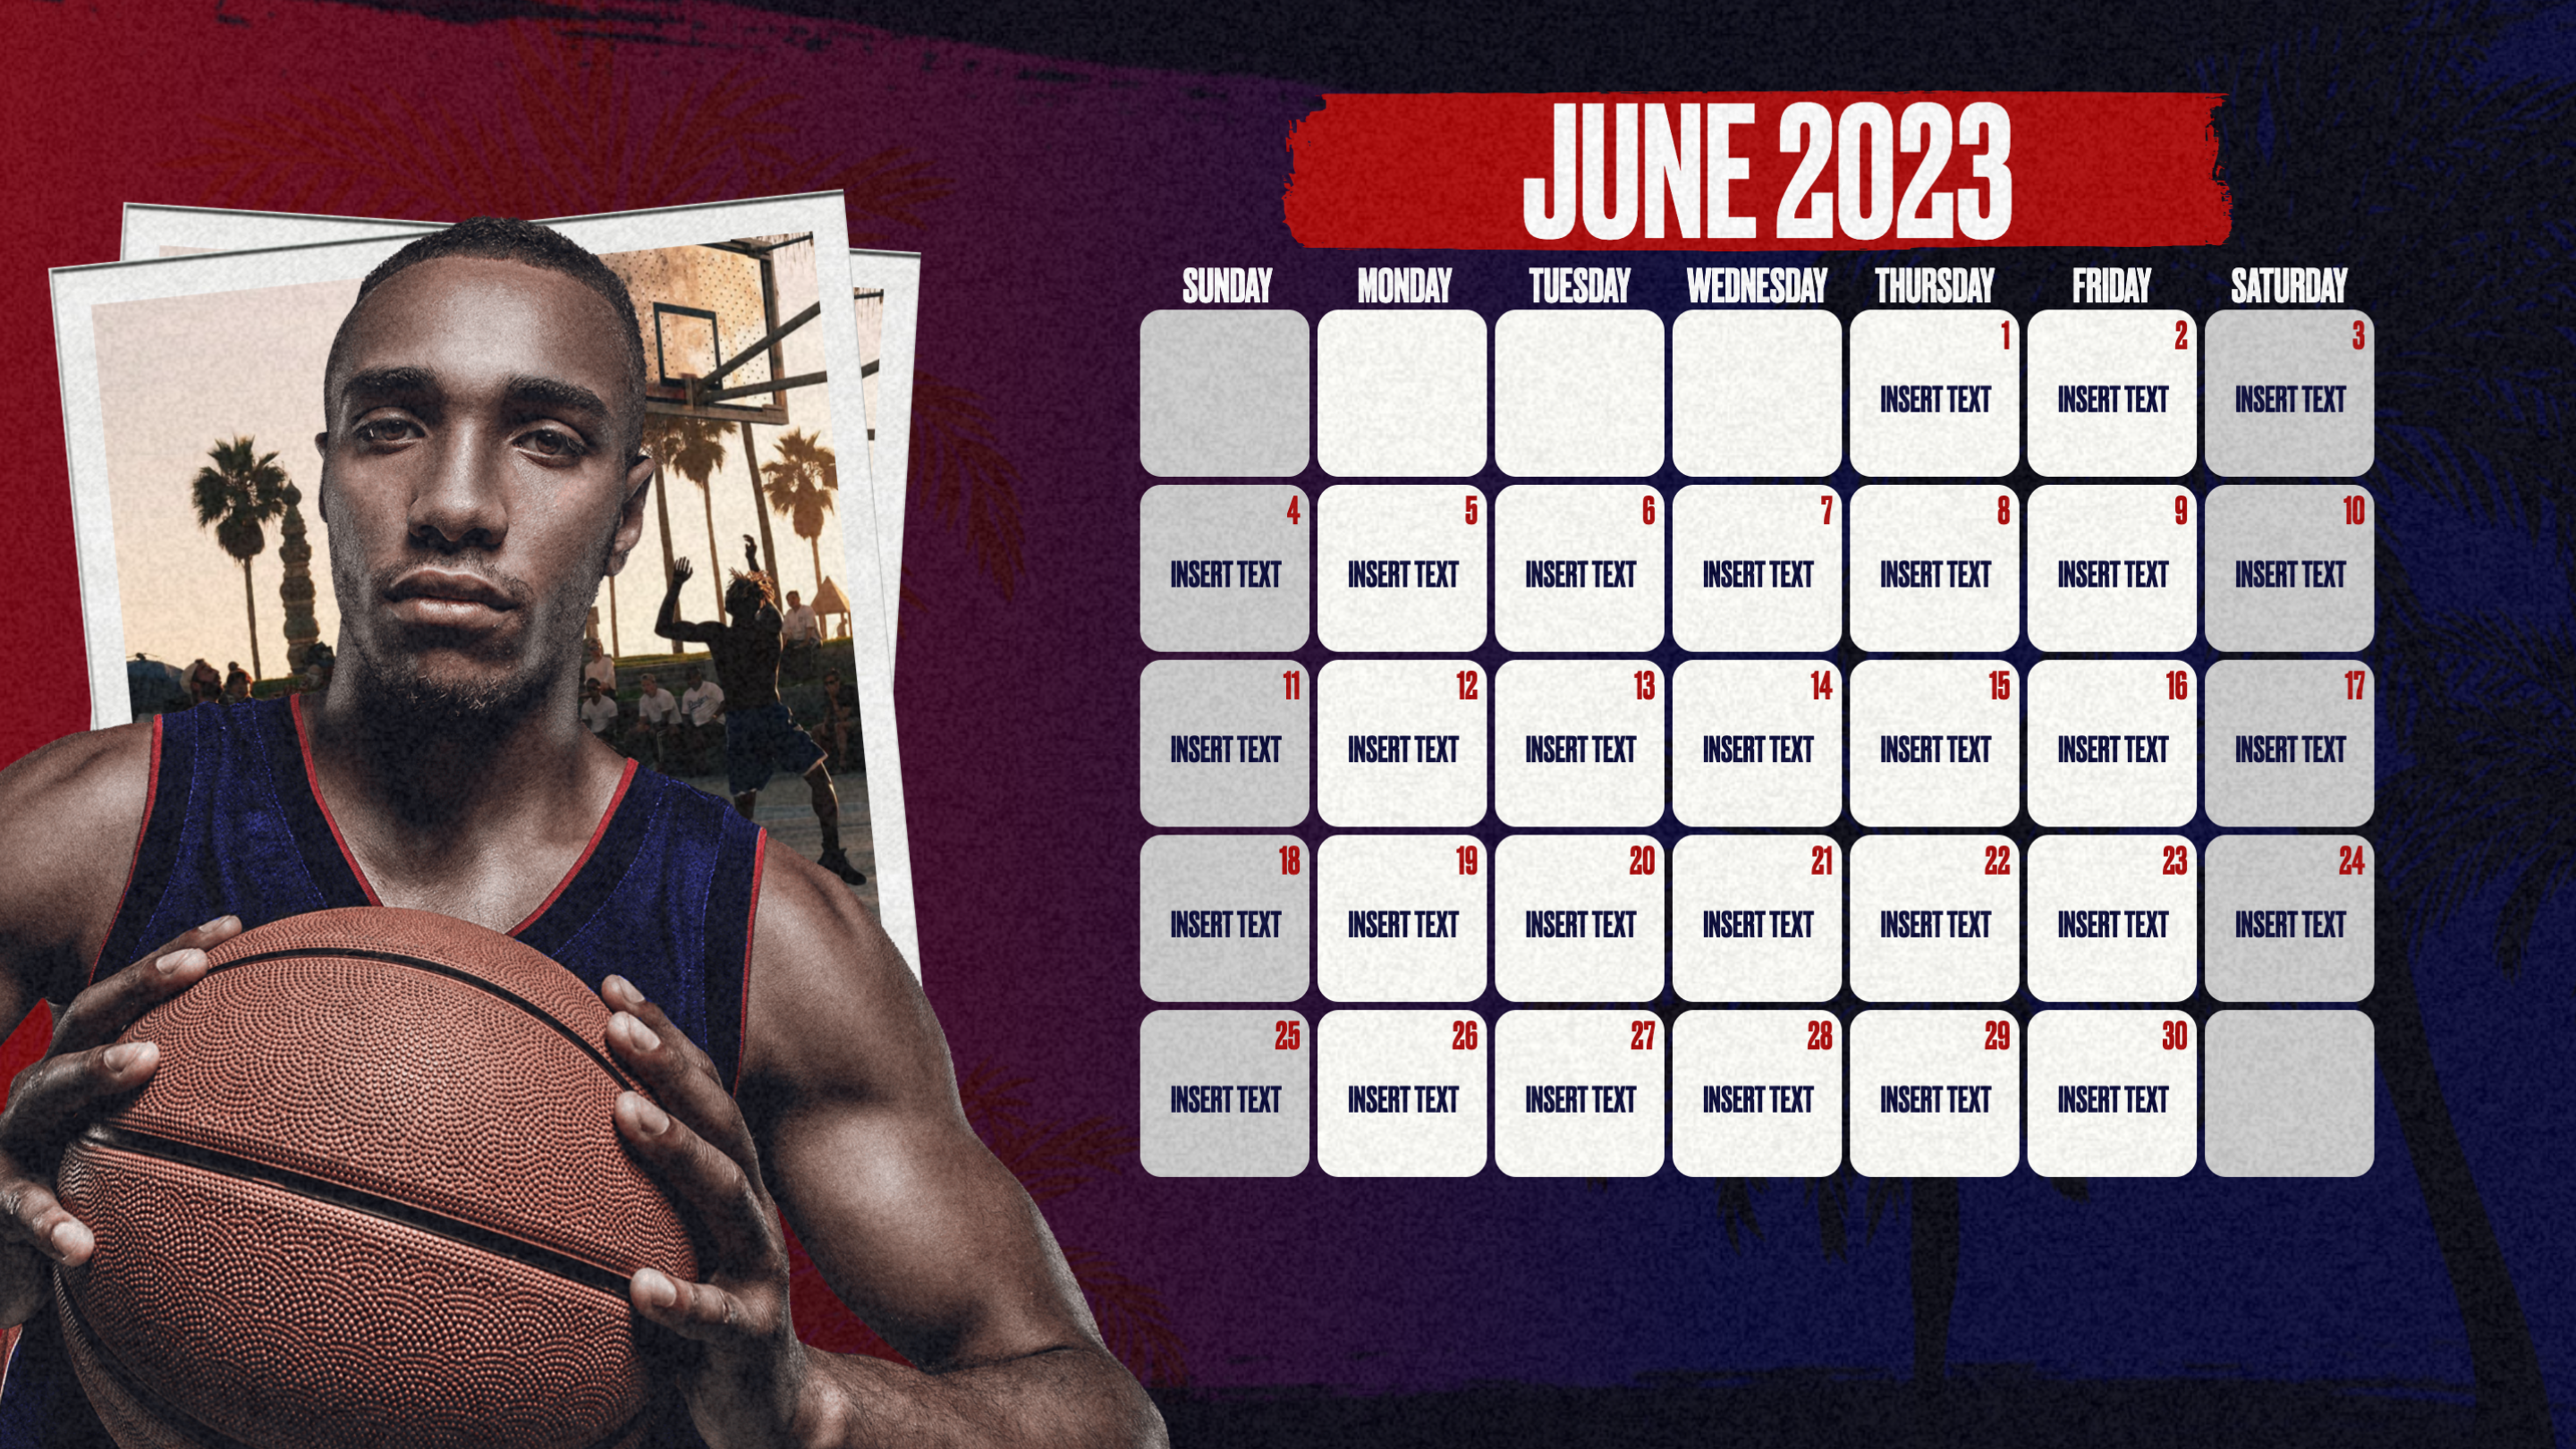 Gipper's 30-day calendar graphic template featuring image of a young male basketball player and a calendar showcasing 30-days. Blue, red, and white color scheme